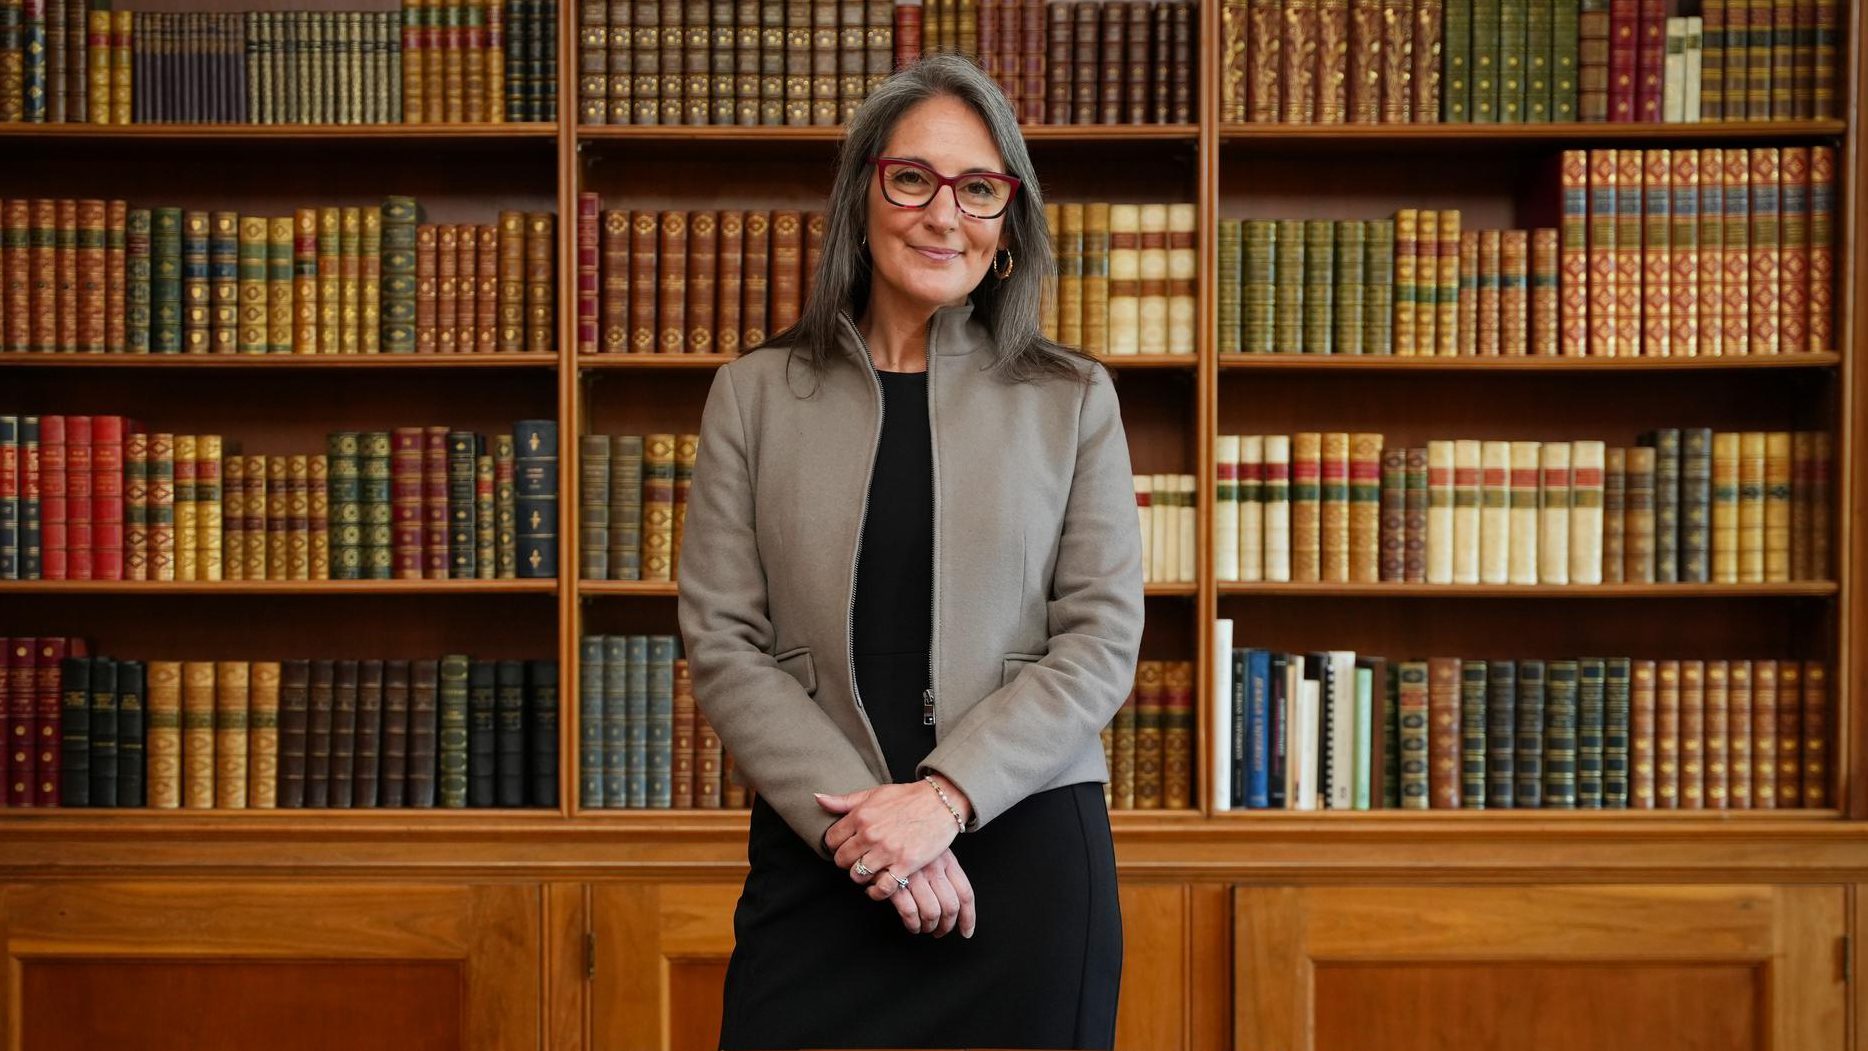 Portrait of a white woman in a suit standing in front of a large bookcase.